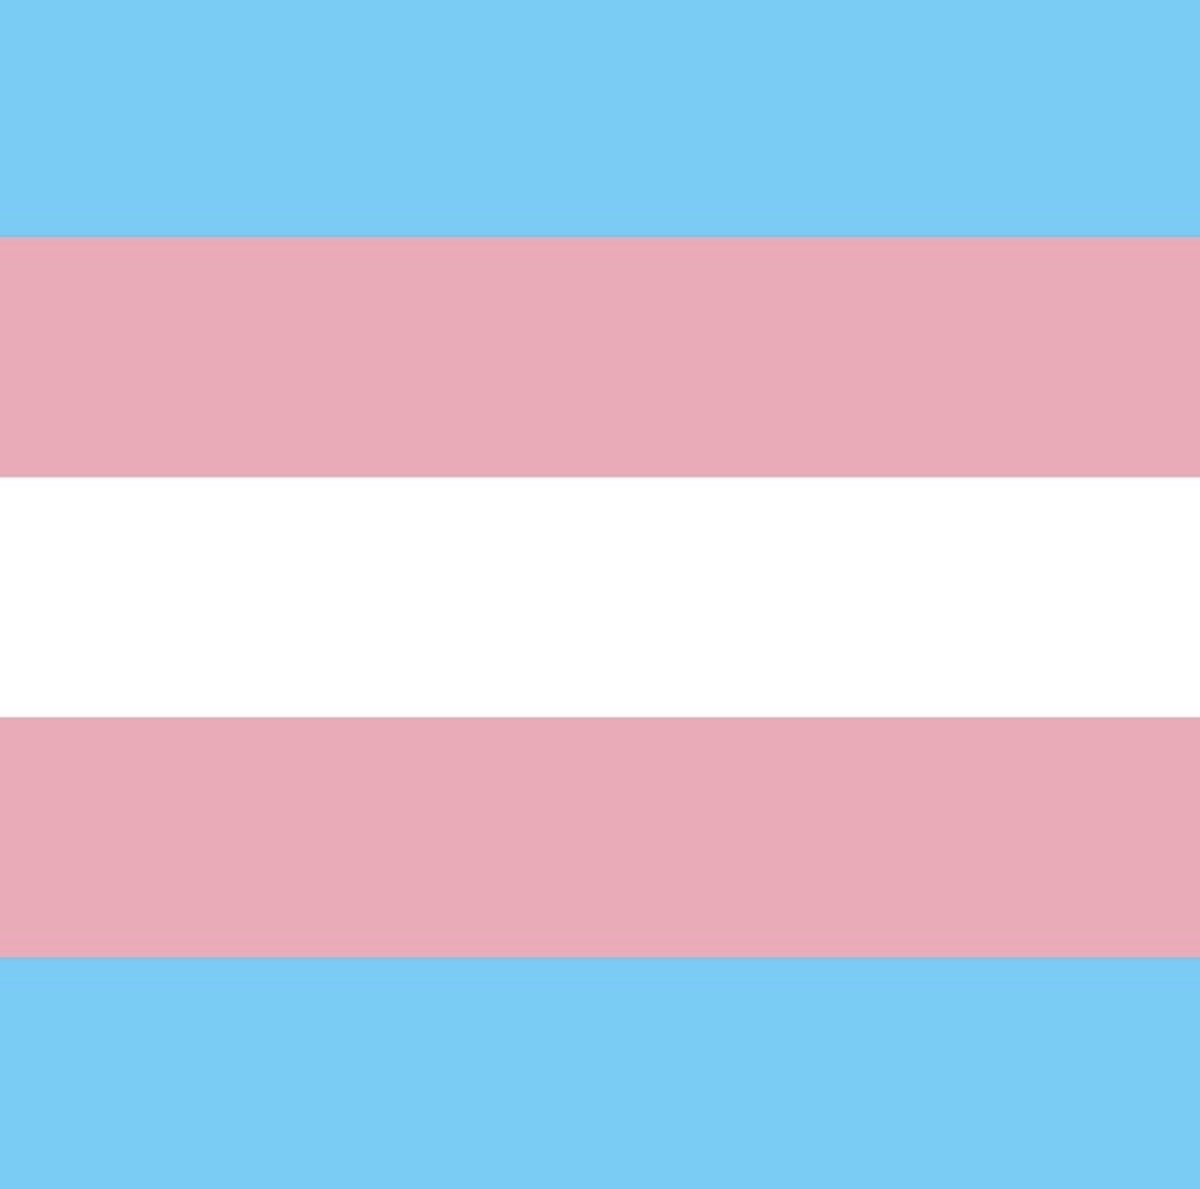 To those seen and unseen, your life is valid. Your pronouns are real. Your safety is mandatory. Trans people shouldn’t be fighting a battle to exist. On Trans Visibility Day—and every day—I stand in solidarity with my trans son and all trans people. ❤️